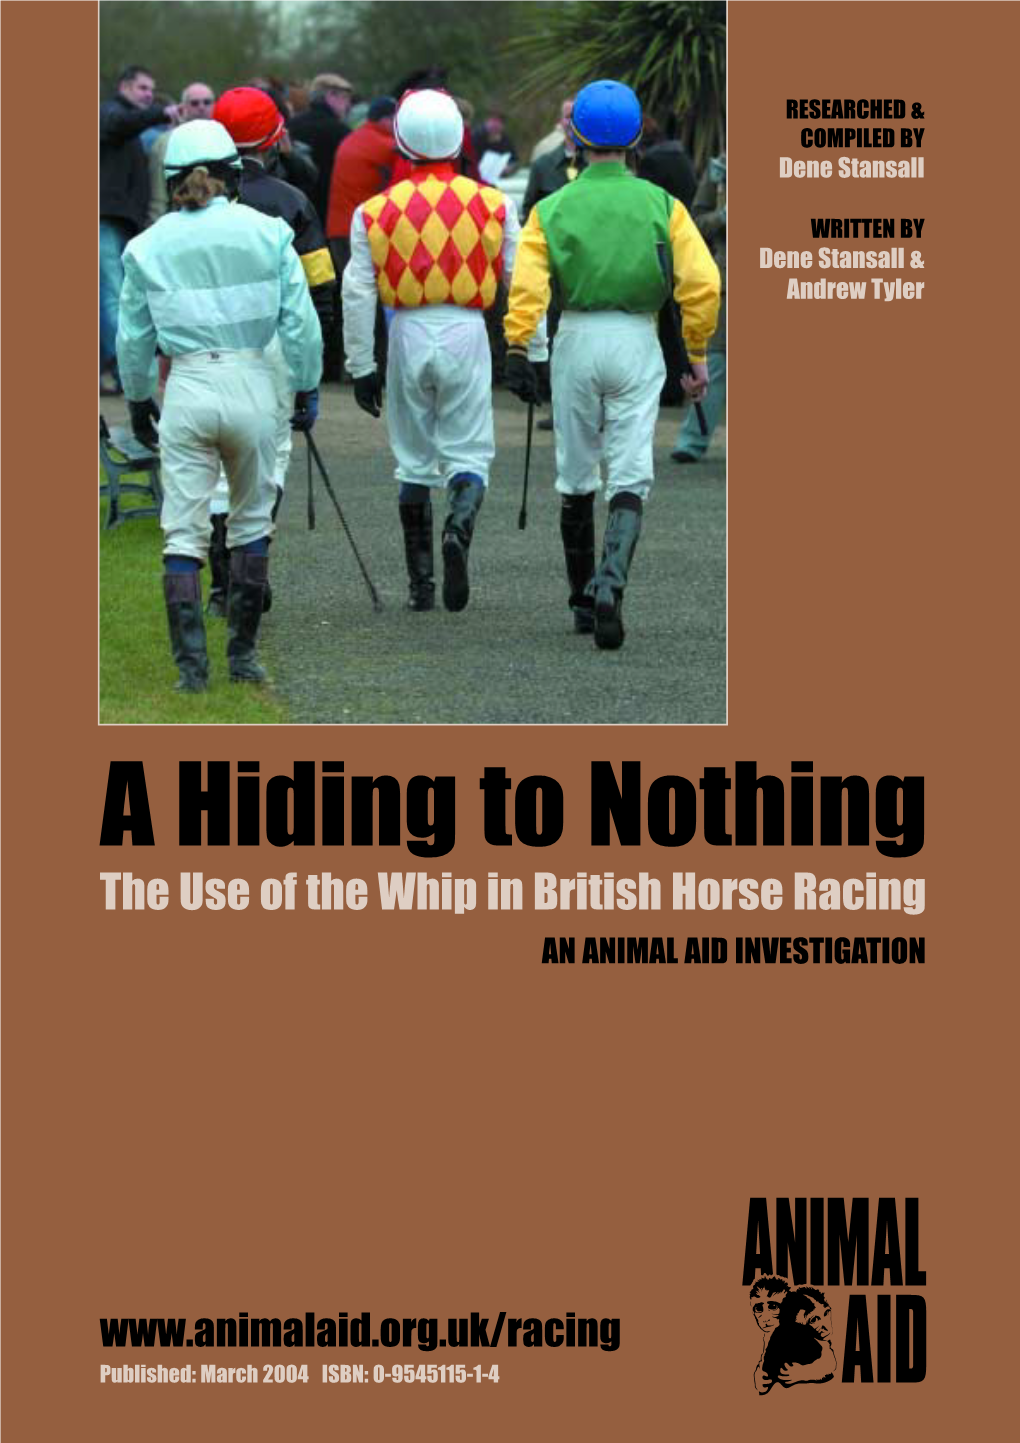 A Hiding to Nothing – the Use of the Whip in British Horse Racing